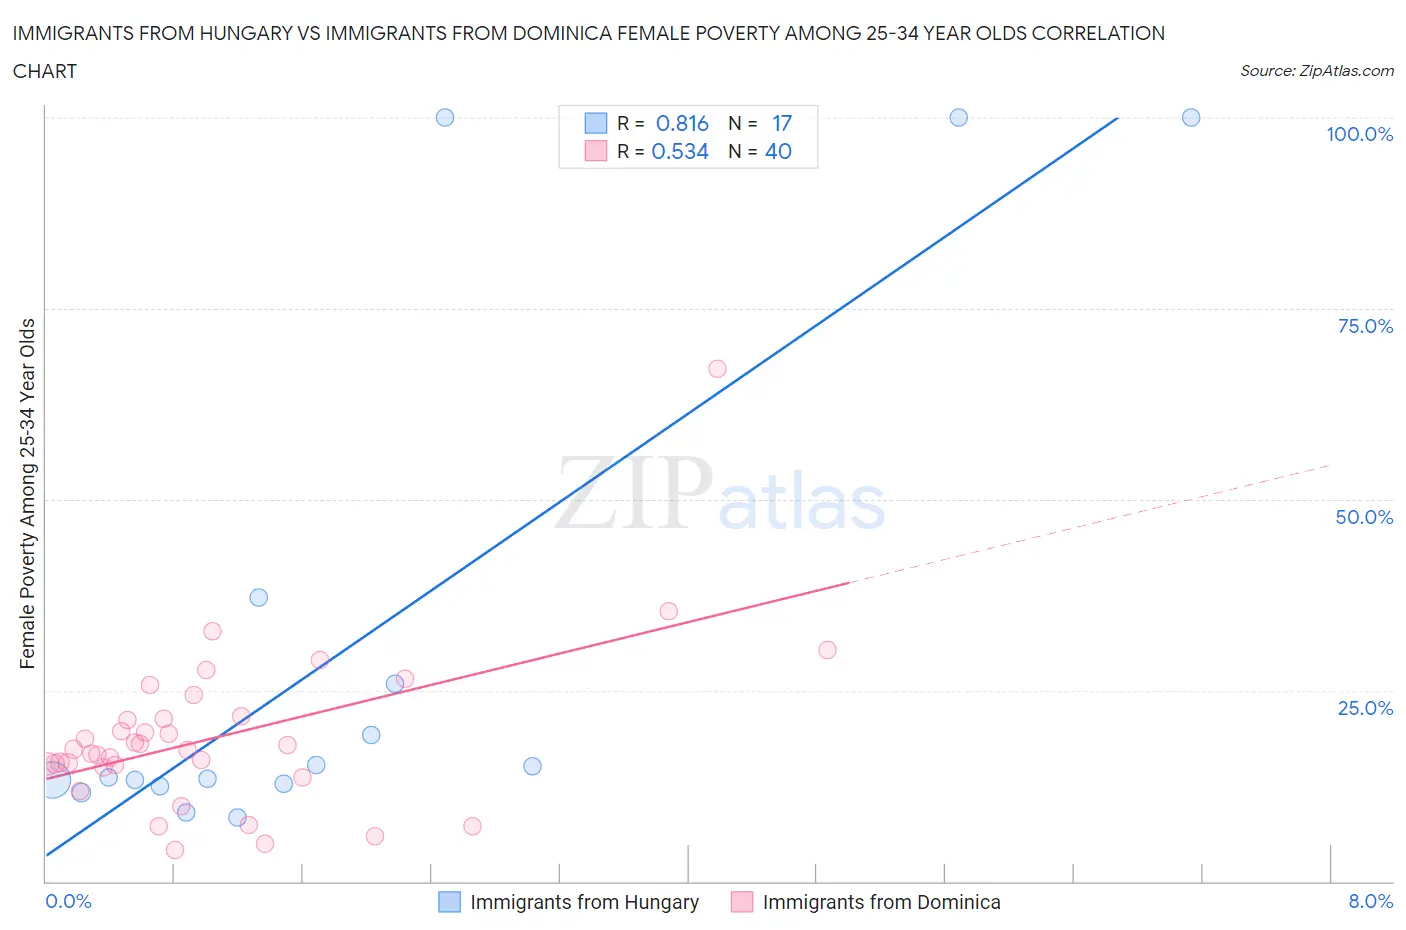 Immigrants from Hungary vs Immigrants from Dominica Female Poverty Among 25-34 Year Olds